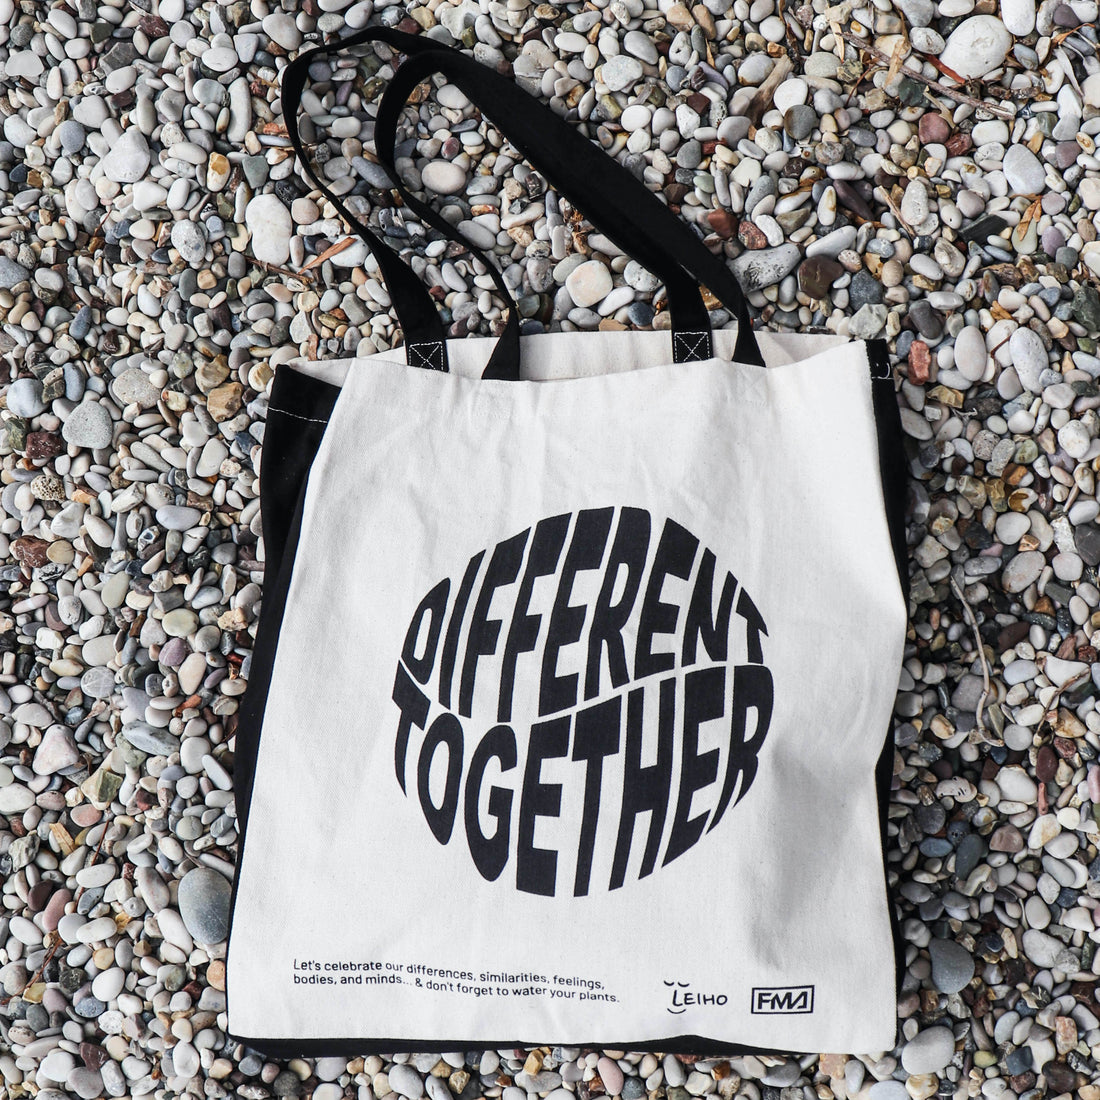 Equality totebags